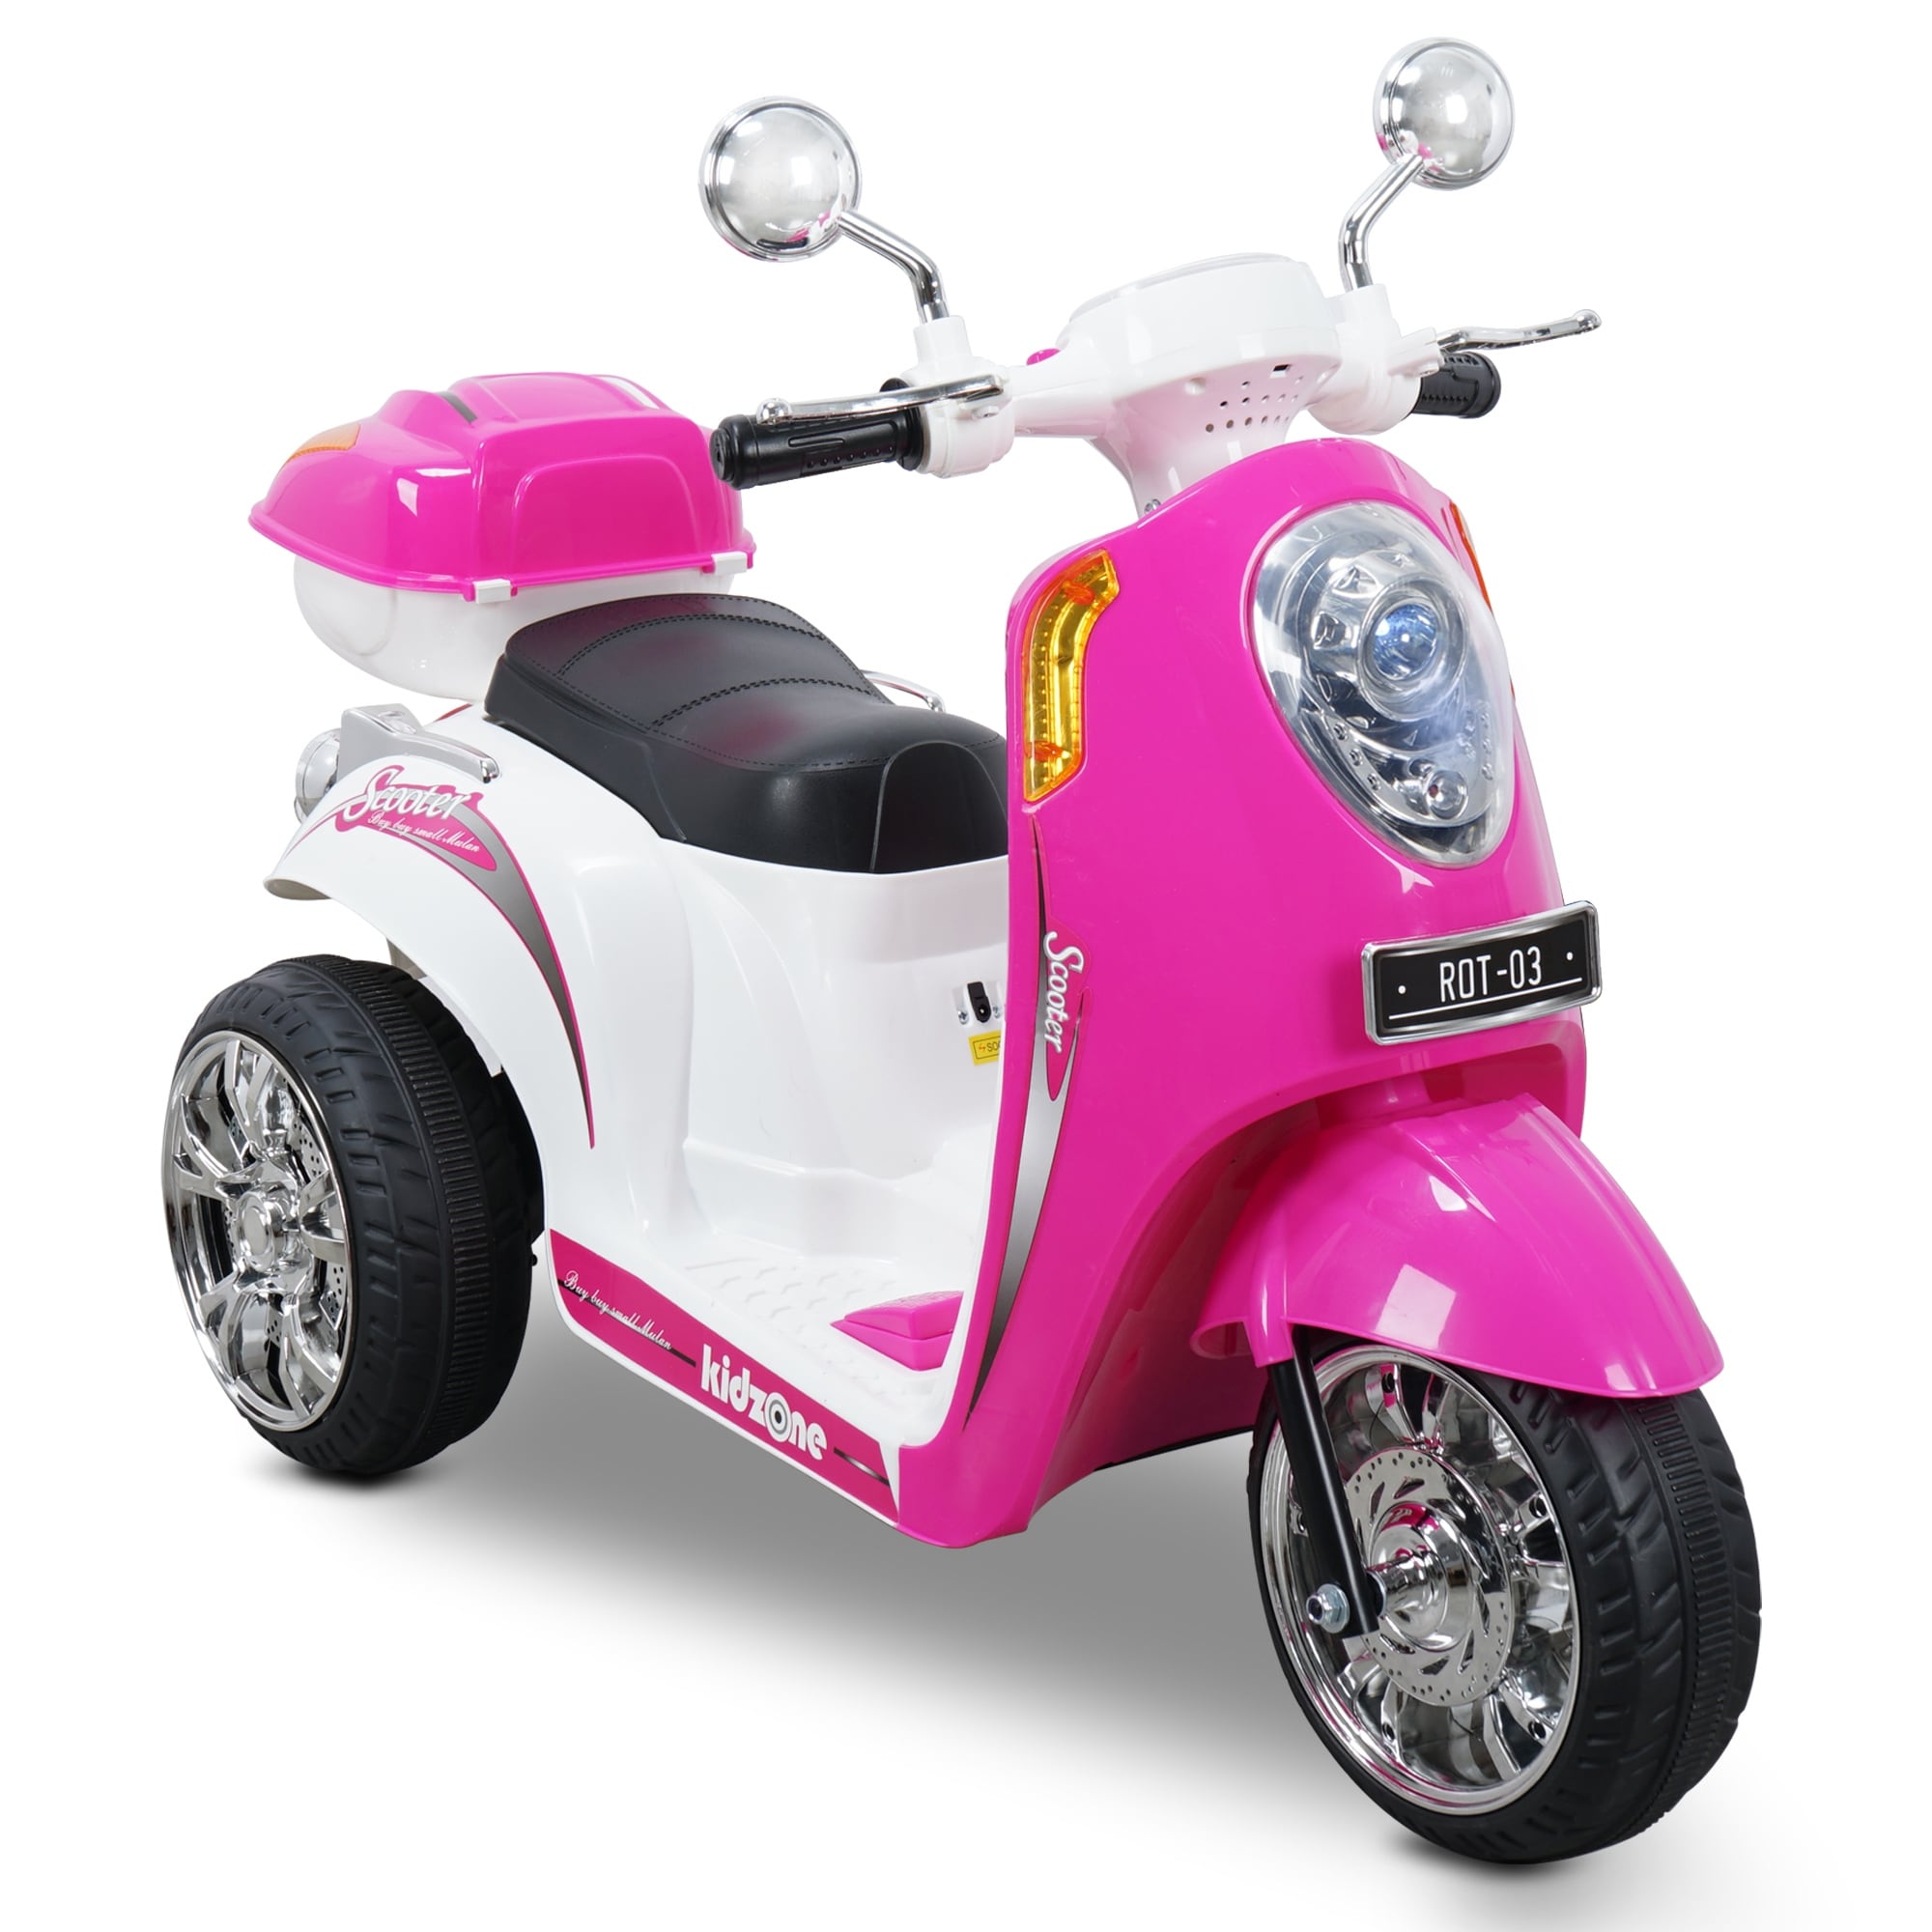 3 wheel scooter for kids